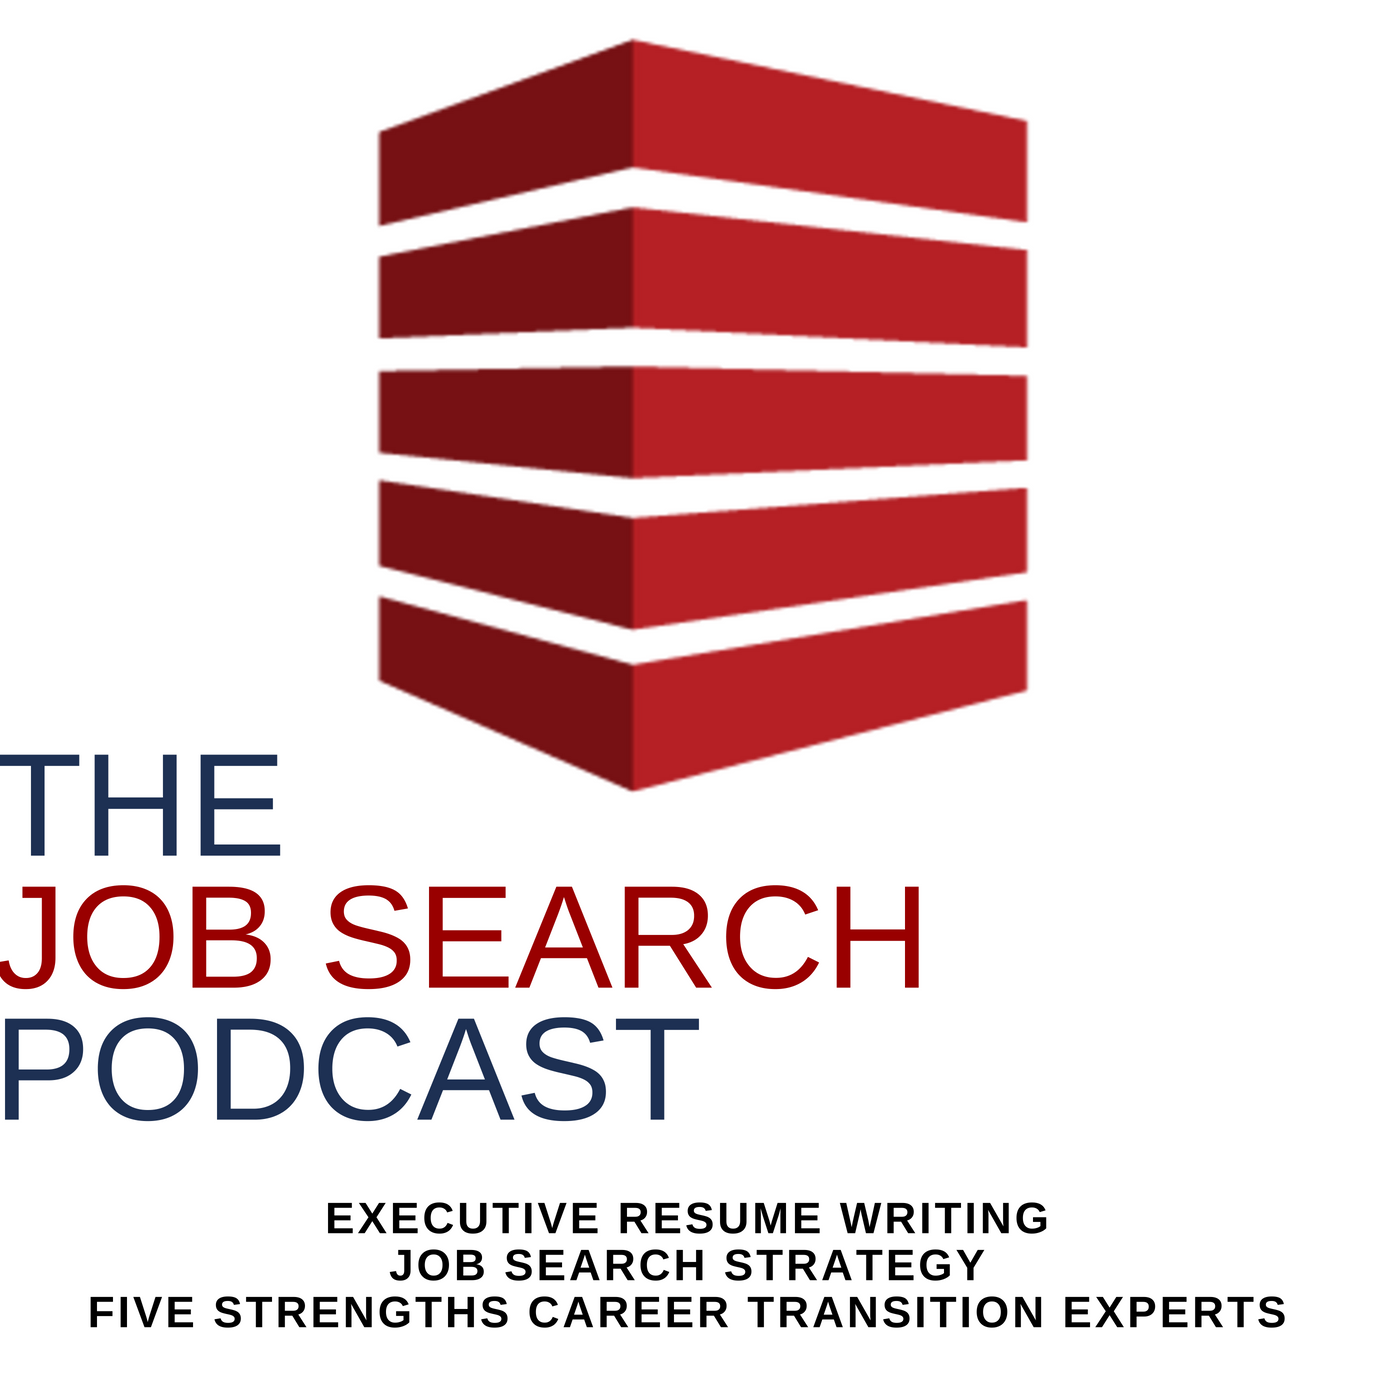 Resume Plagiarism Avoid the Sordid Side in Your Executive Job Search | The Job Search Podcast